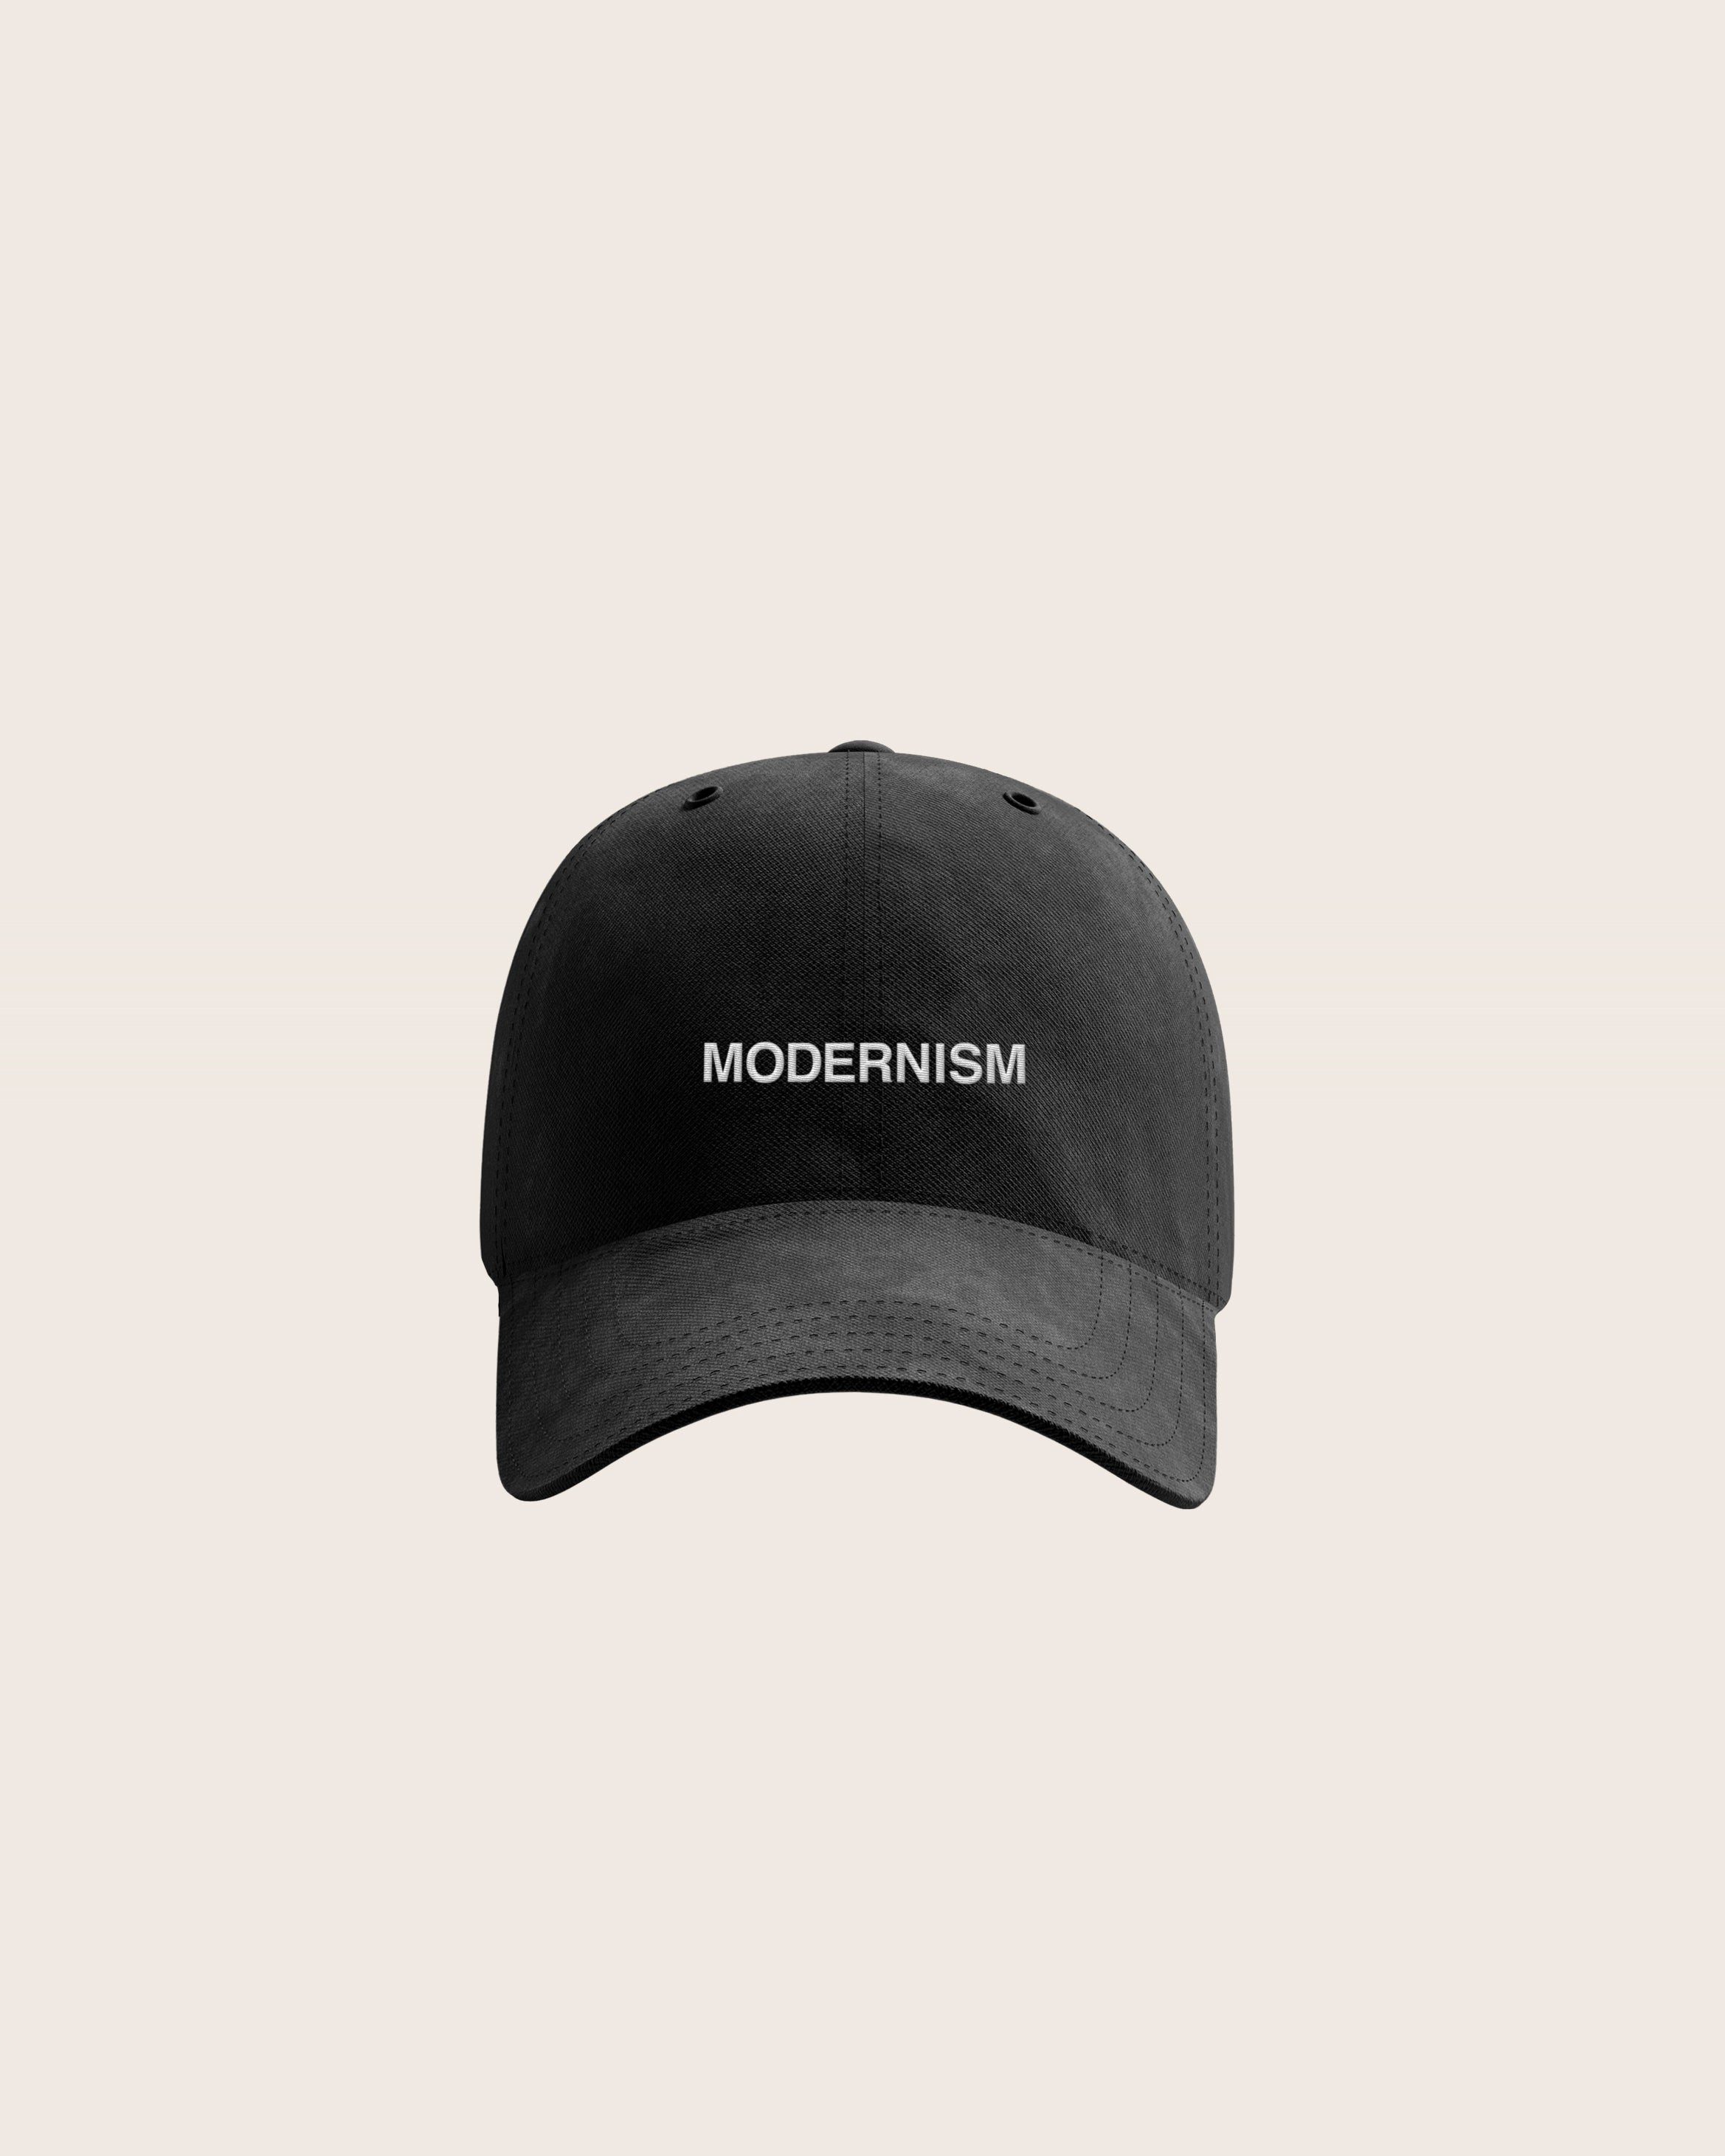 Black Baseball Cap / Dad Hat with Modernism Art Movement Text Embroidery on Front. 100% Cotton.